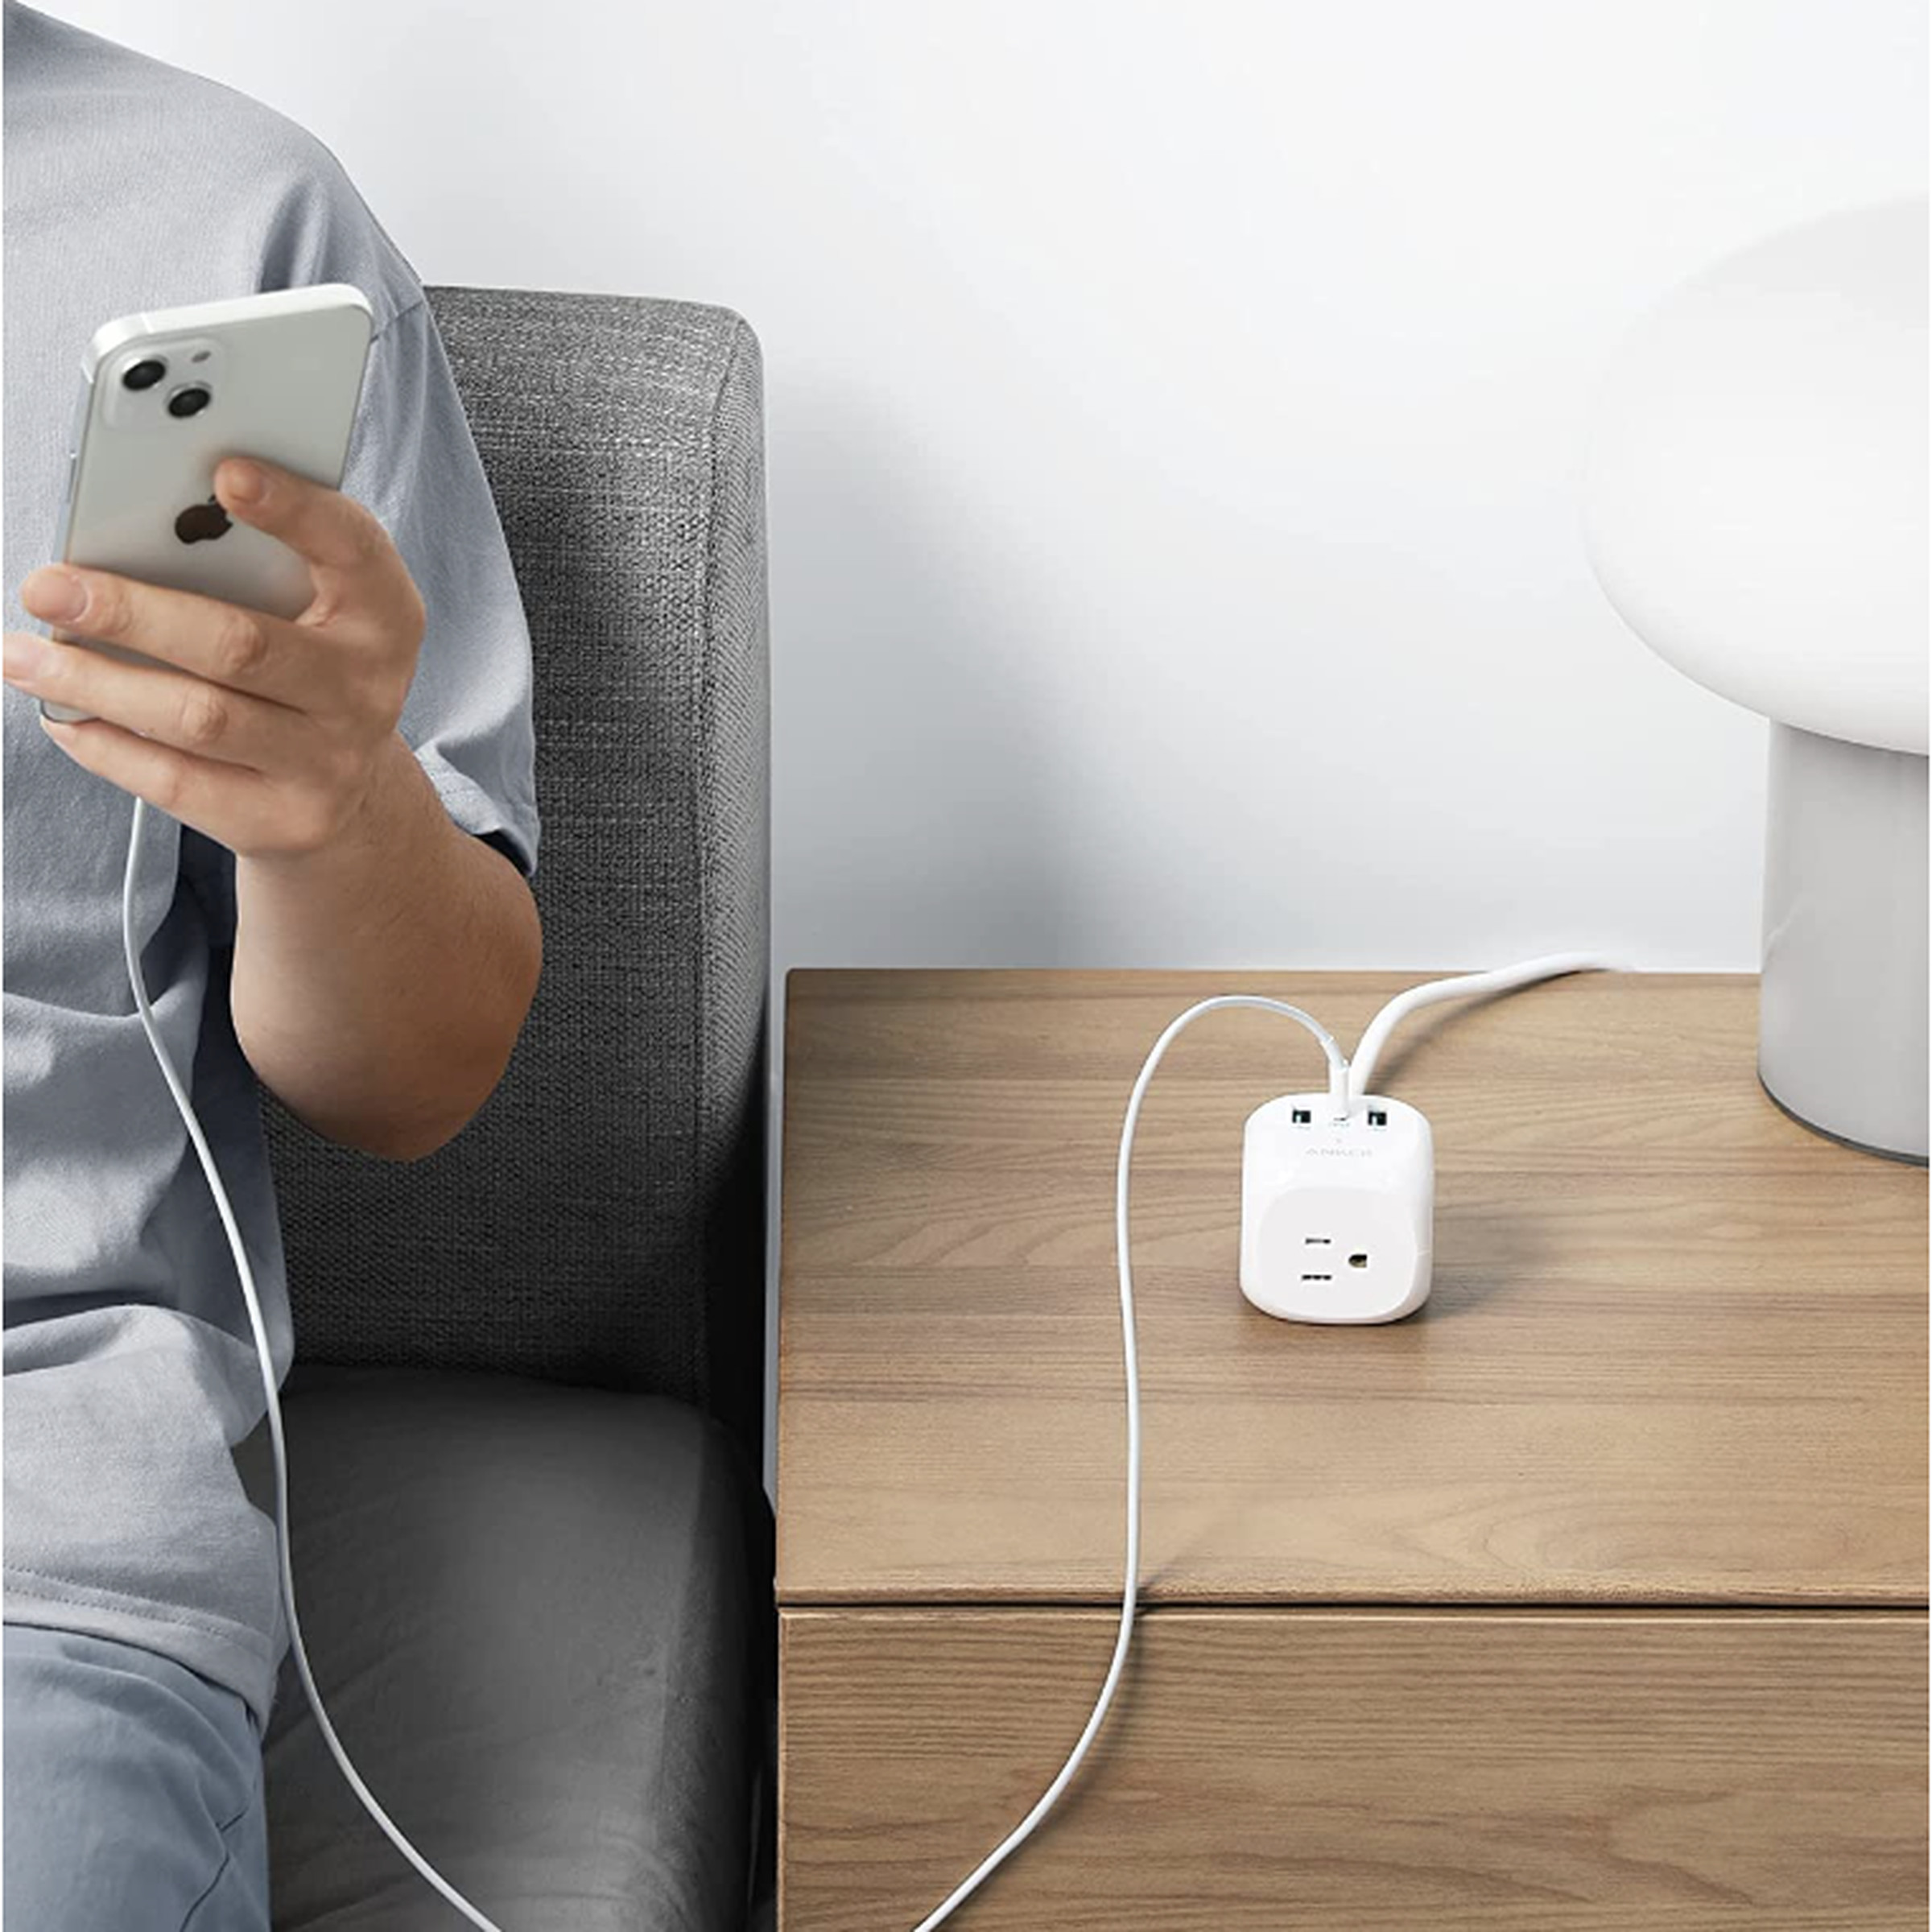 Anker cube power strip on table in between a person with a phone and a computer